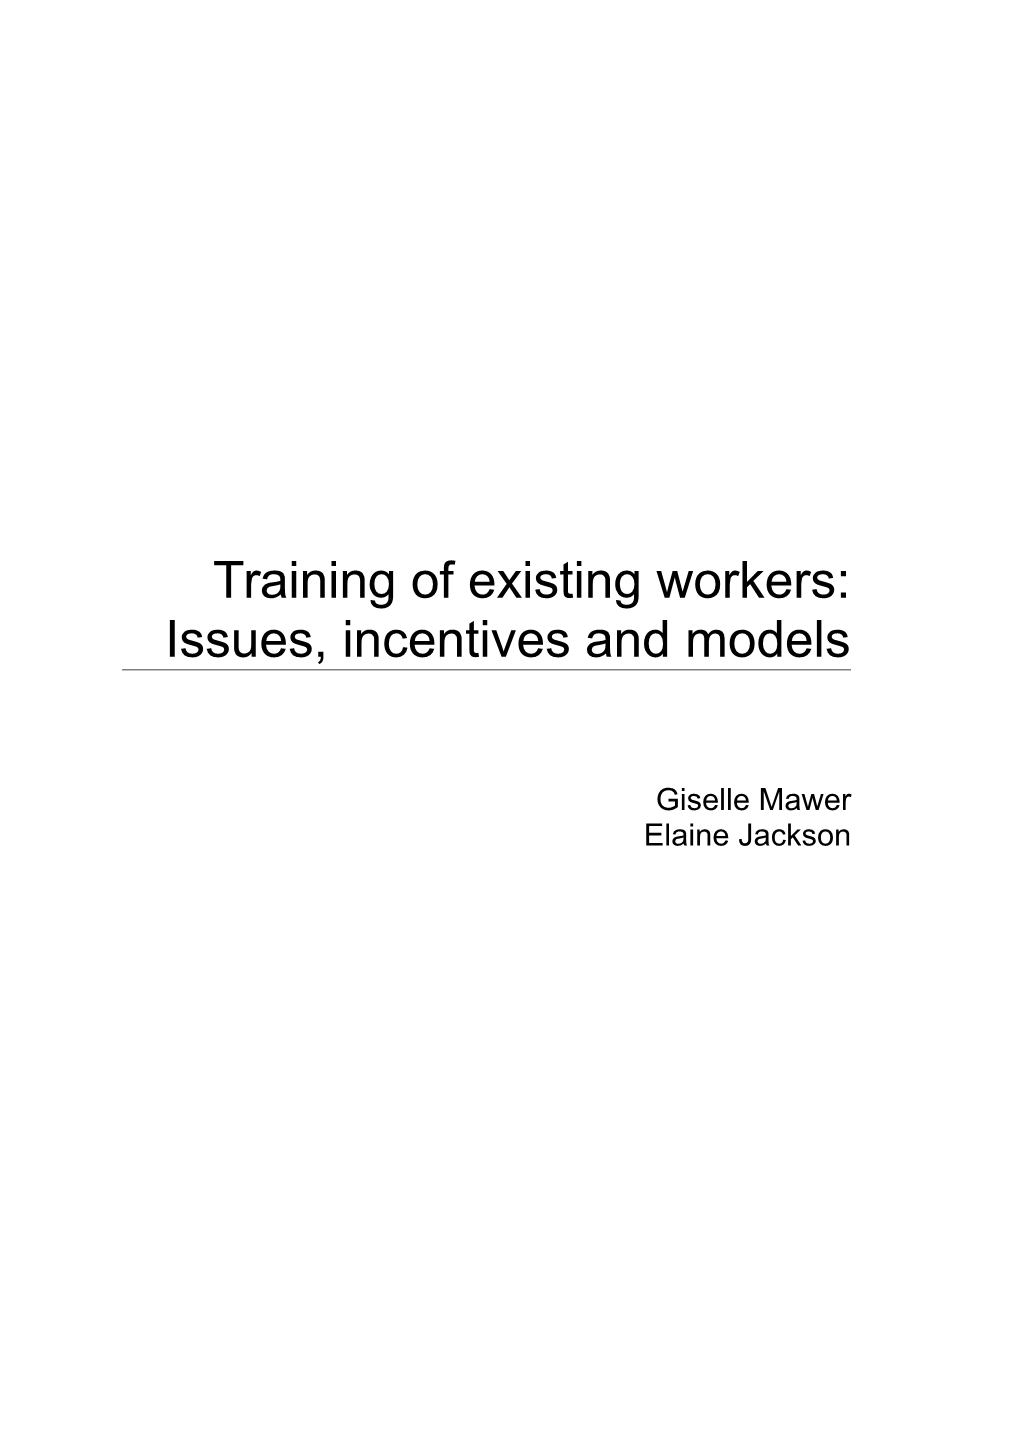 Training of Existing Workers